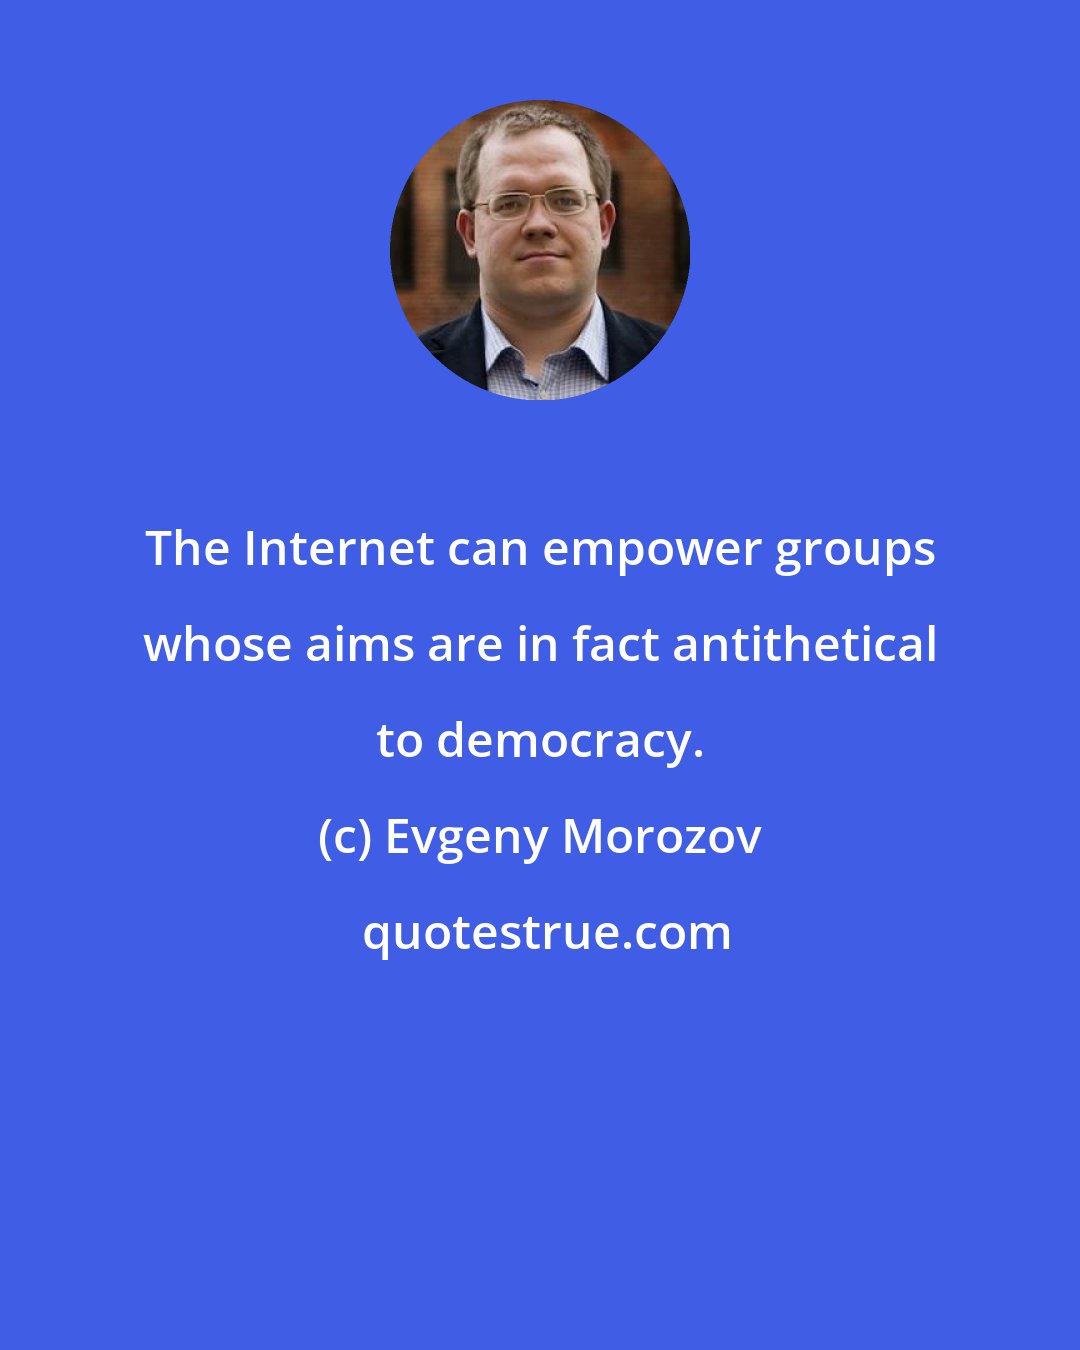 Evgeny Morozov: The Internet can empower groups whose aims are in fact antithetical to democracy.